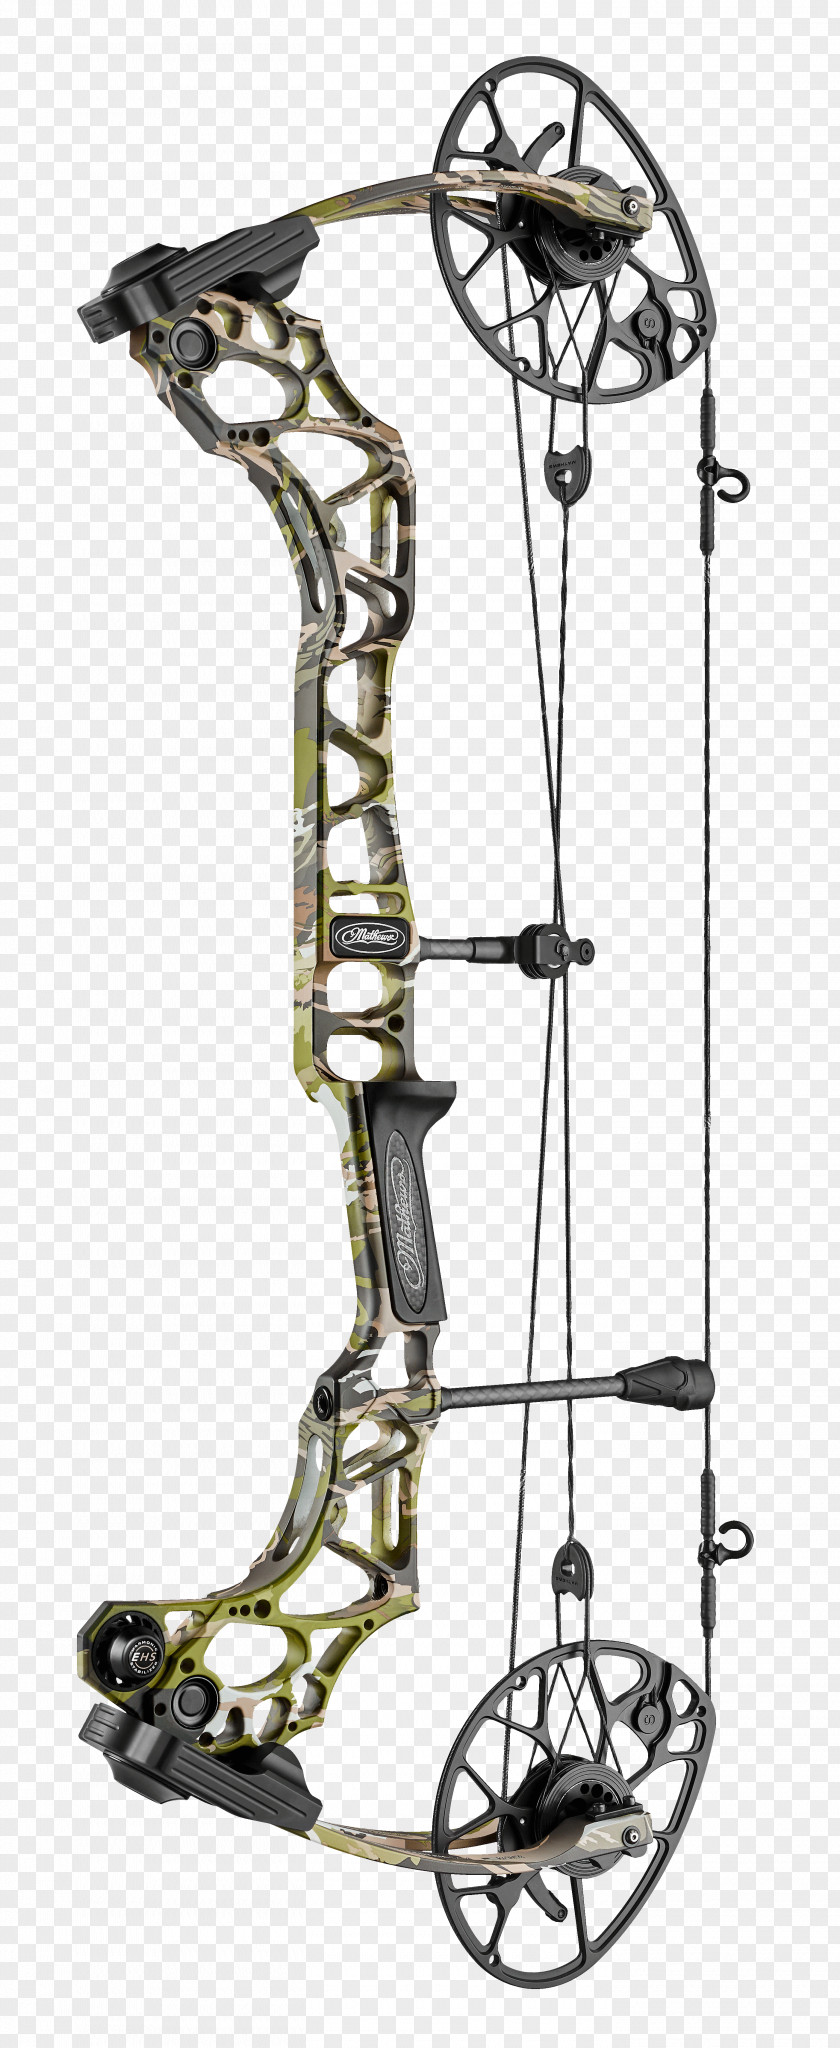 Bow Arrow Bowhunting Compound Bows Mathews Archery, Inc. And PNG